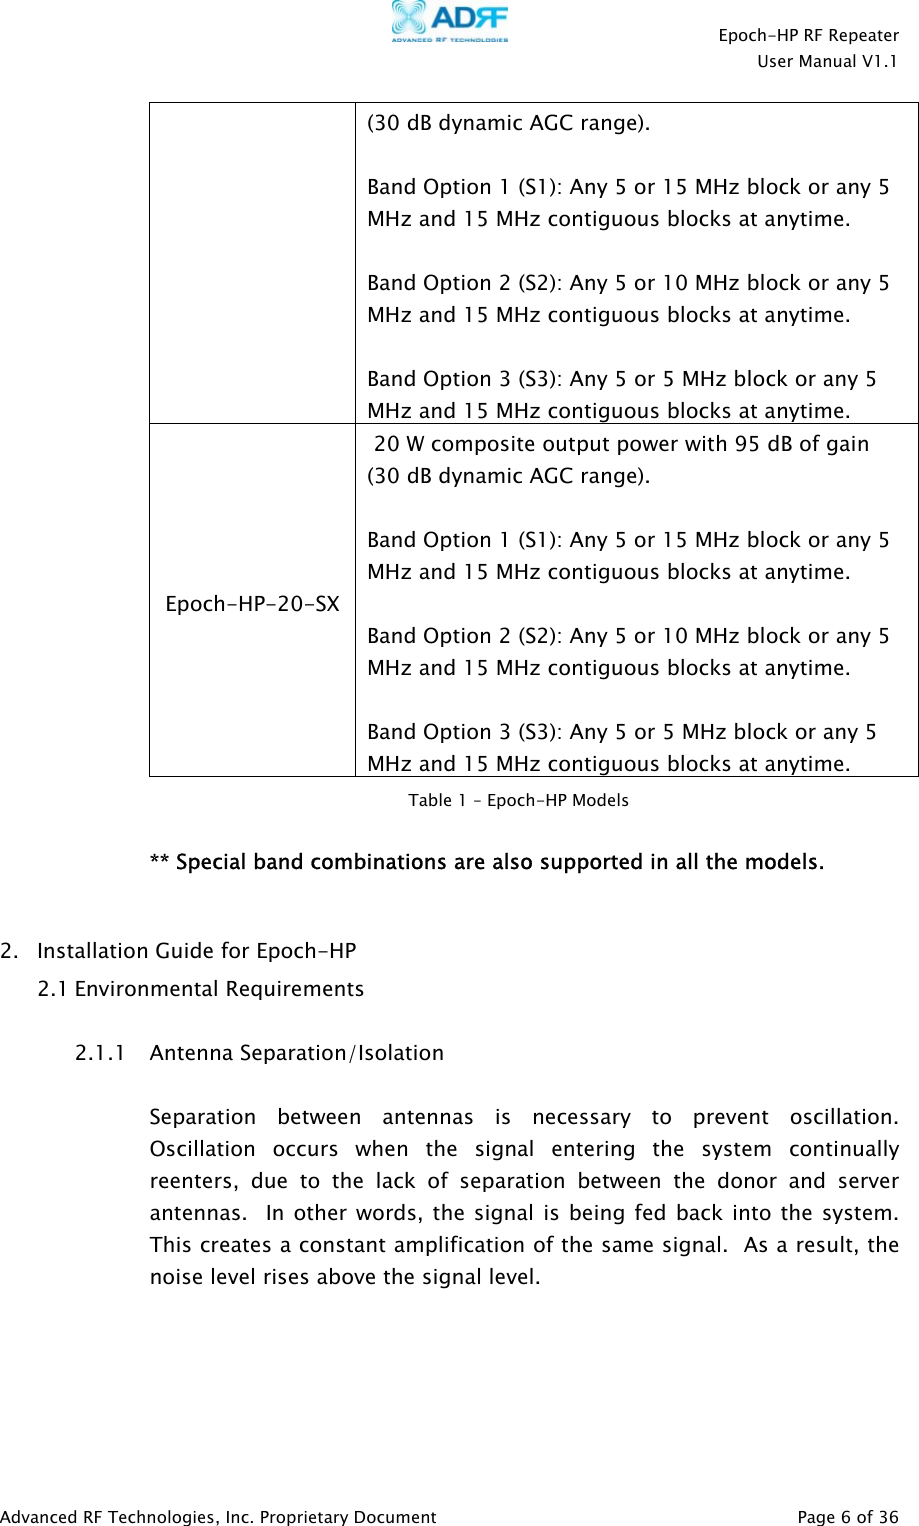    Epoch-HP RF Repeater  User Manual V1.1  Advanced RF Technologies, Inc. Proprietary Document   Page 6 of 36  (30 dB dynamic AGC range).  Band Option 1 (S1): Any 5 or 15 MHz block or any 5 MHz and 15 MHz contiguous blocks at anytime.  Band Option 2 (S2): Any 5 or 10 MHz block or any 5 MHz and 15 MHz contiguous blocks at anytime.  Band Option 3 (S3): Any 5 or 5 MHz block or any 5 MHz and 15 MHz contiguous blocks at anytime. Epoch-HP-20-SX  20 W composite output power with 95 dB of gain (30 dB dynamic AGC range).  Band Option 1 (S1): Any 5 or 15 MHz block or any 5 MHz and 15 MHz contiguous blocks at anytime.  Band Option 2 (S2): Any 5 or 10 MHz block or any 5 MHz and 15 MHz contiguous blocks at anytime.  Band Option 3 (S3): Any 5 or 5 MHz block or any 5 MHz and 15 MHz contiguous blocks at anytime.   ** Special band combinations are also supported in all the models.  2. Installation Guide for Epoch-HP  2.1 Environmental Requirements  2.1.1 Antenna Separation/Isolation   Separation between antennas is necessary to prevent oscillation. Oscillation occurs when the signal entering the system continually reenters, due to the lack of separation between the donor and server antennas.  In other words, the signal is being fed back into the system.  This creates a constant amplification of the same signal.  As a result, the noise level rises above the signal level.   Table 1 – Epoch-HP Models